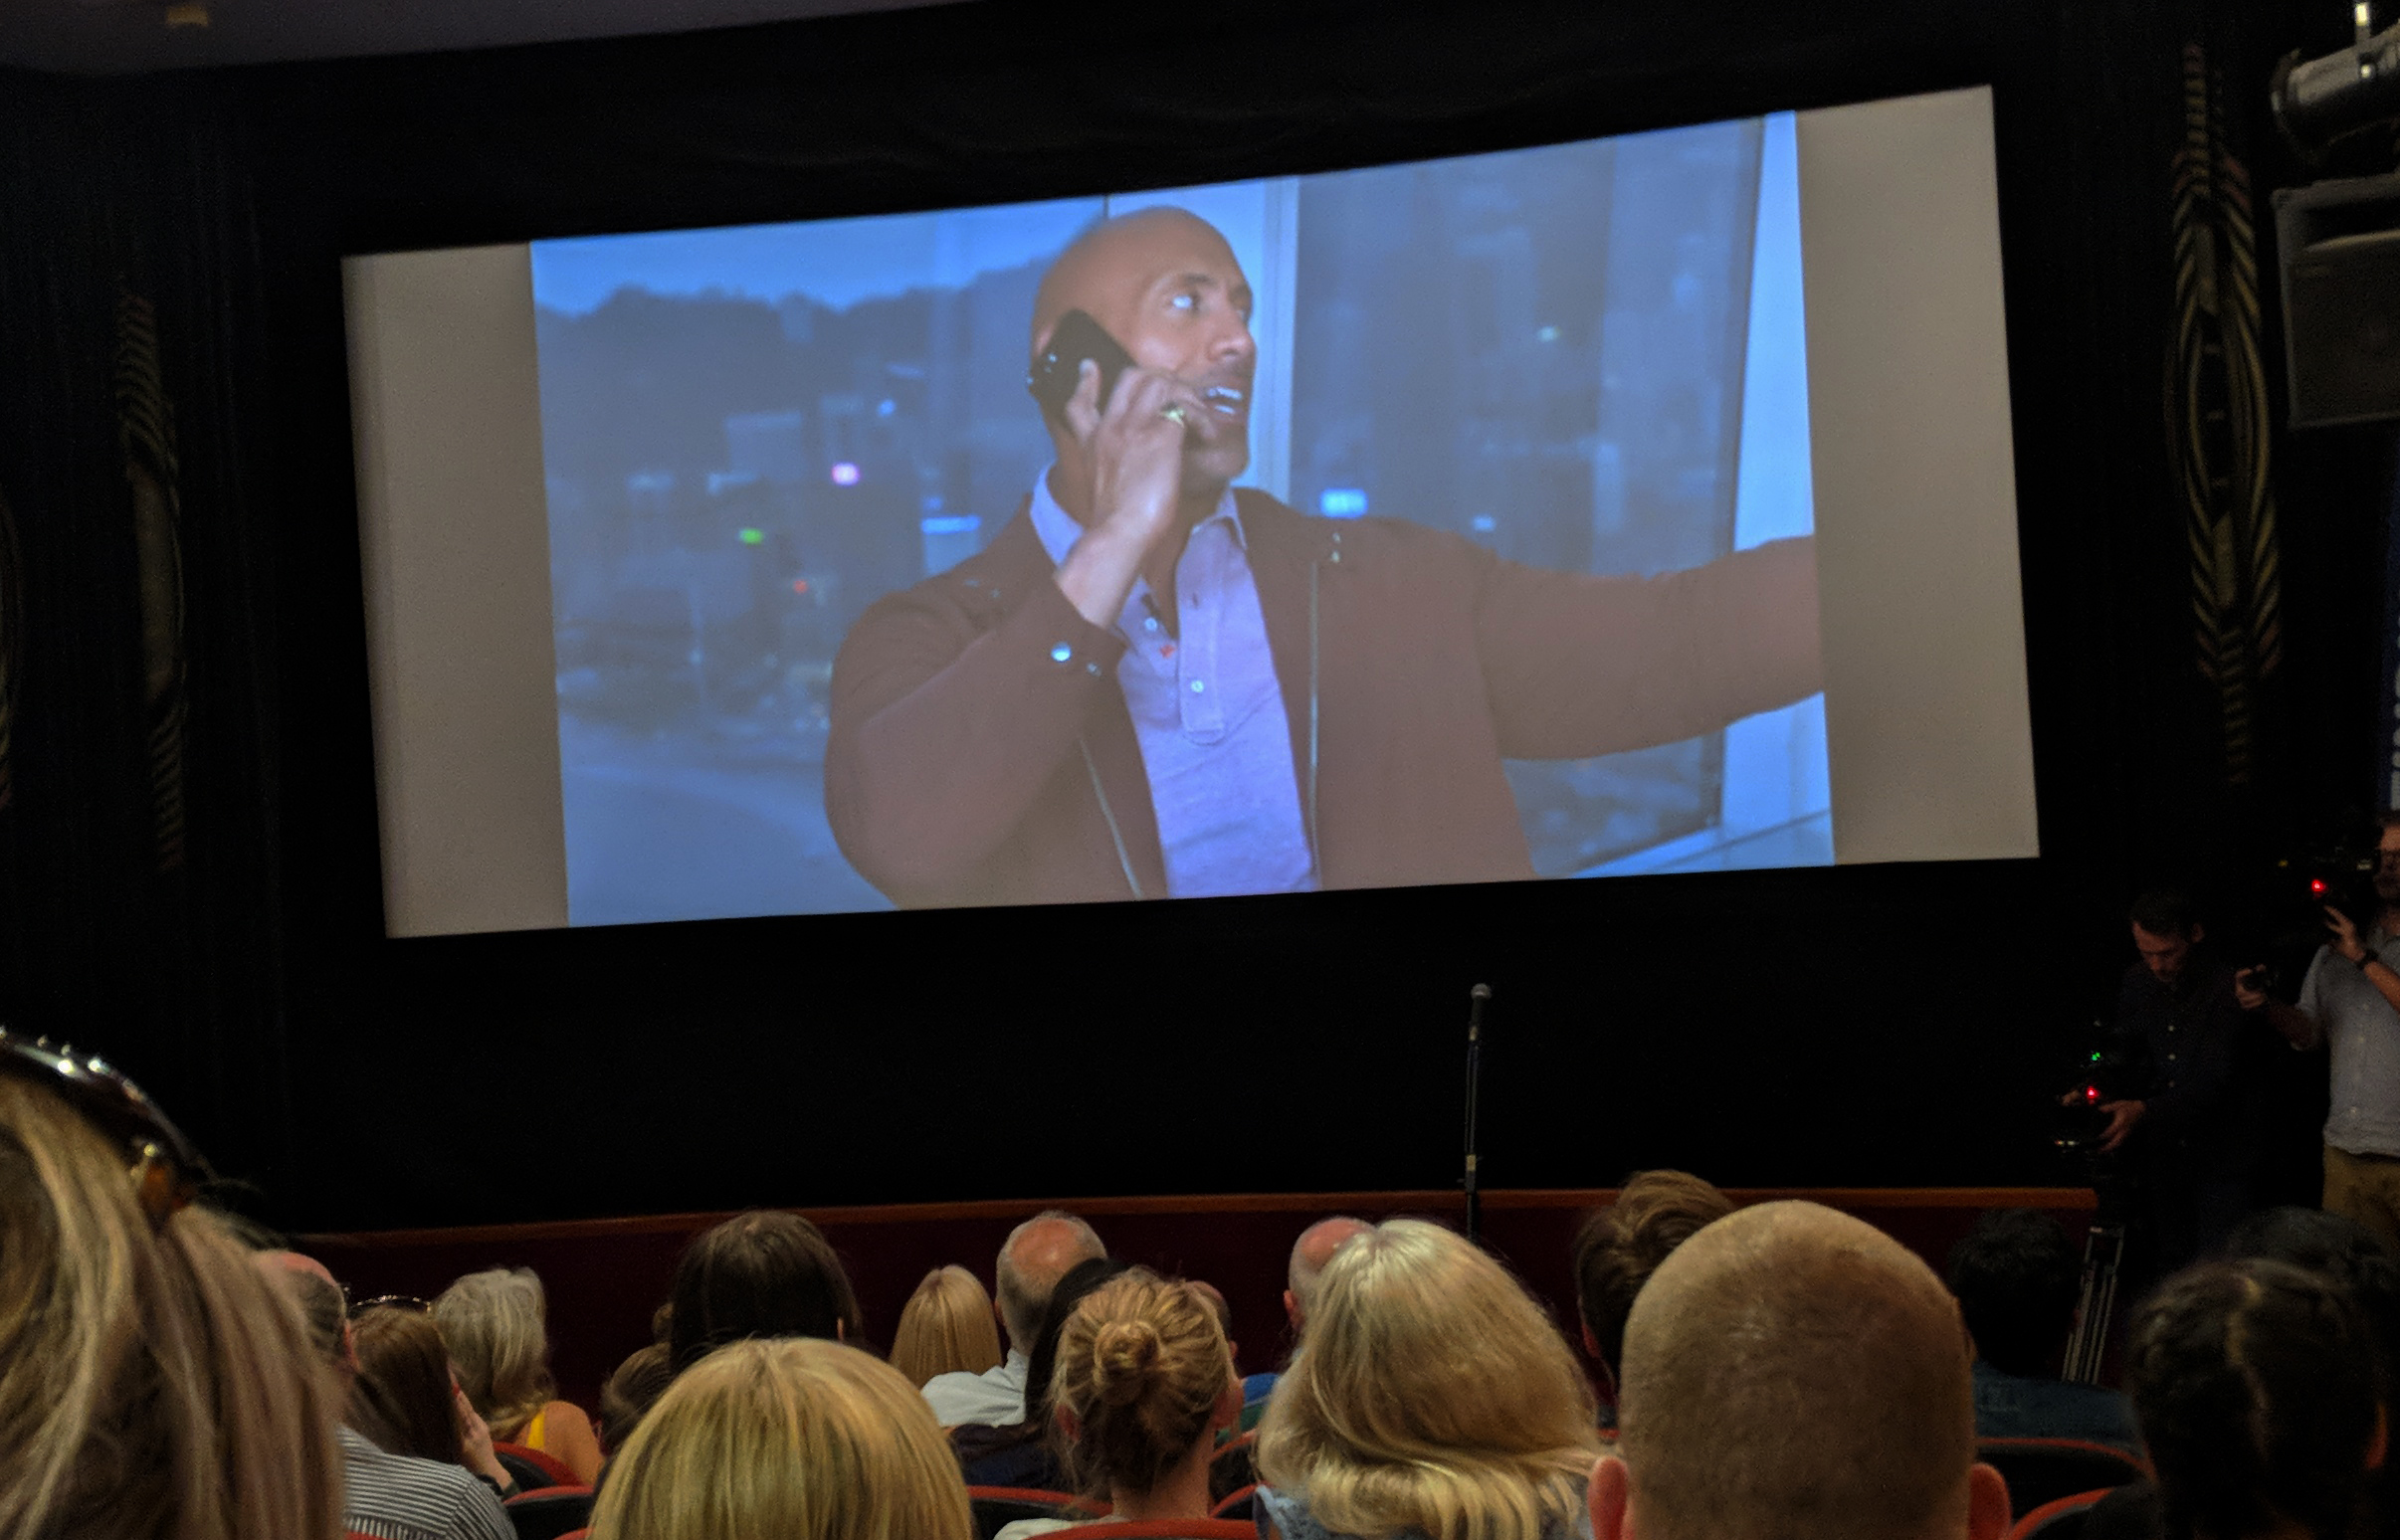 The Rock surprises guests at the screening event (Finding Your Feet)